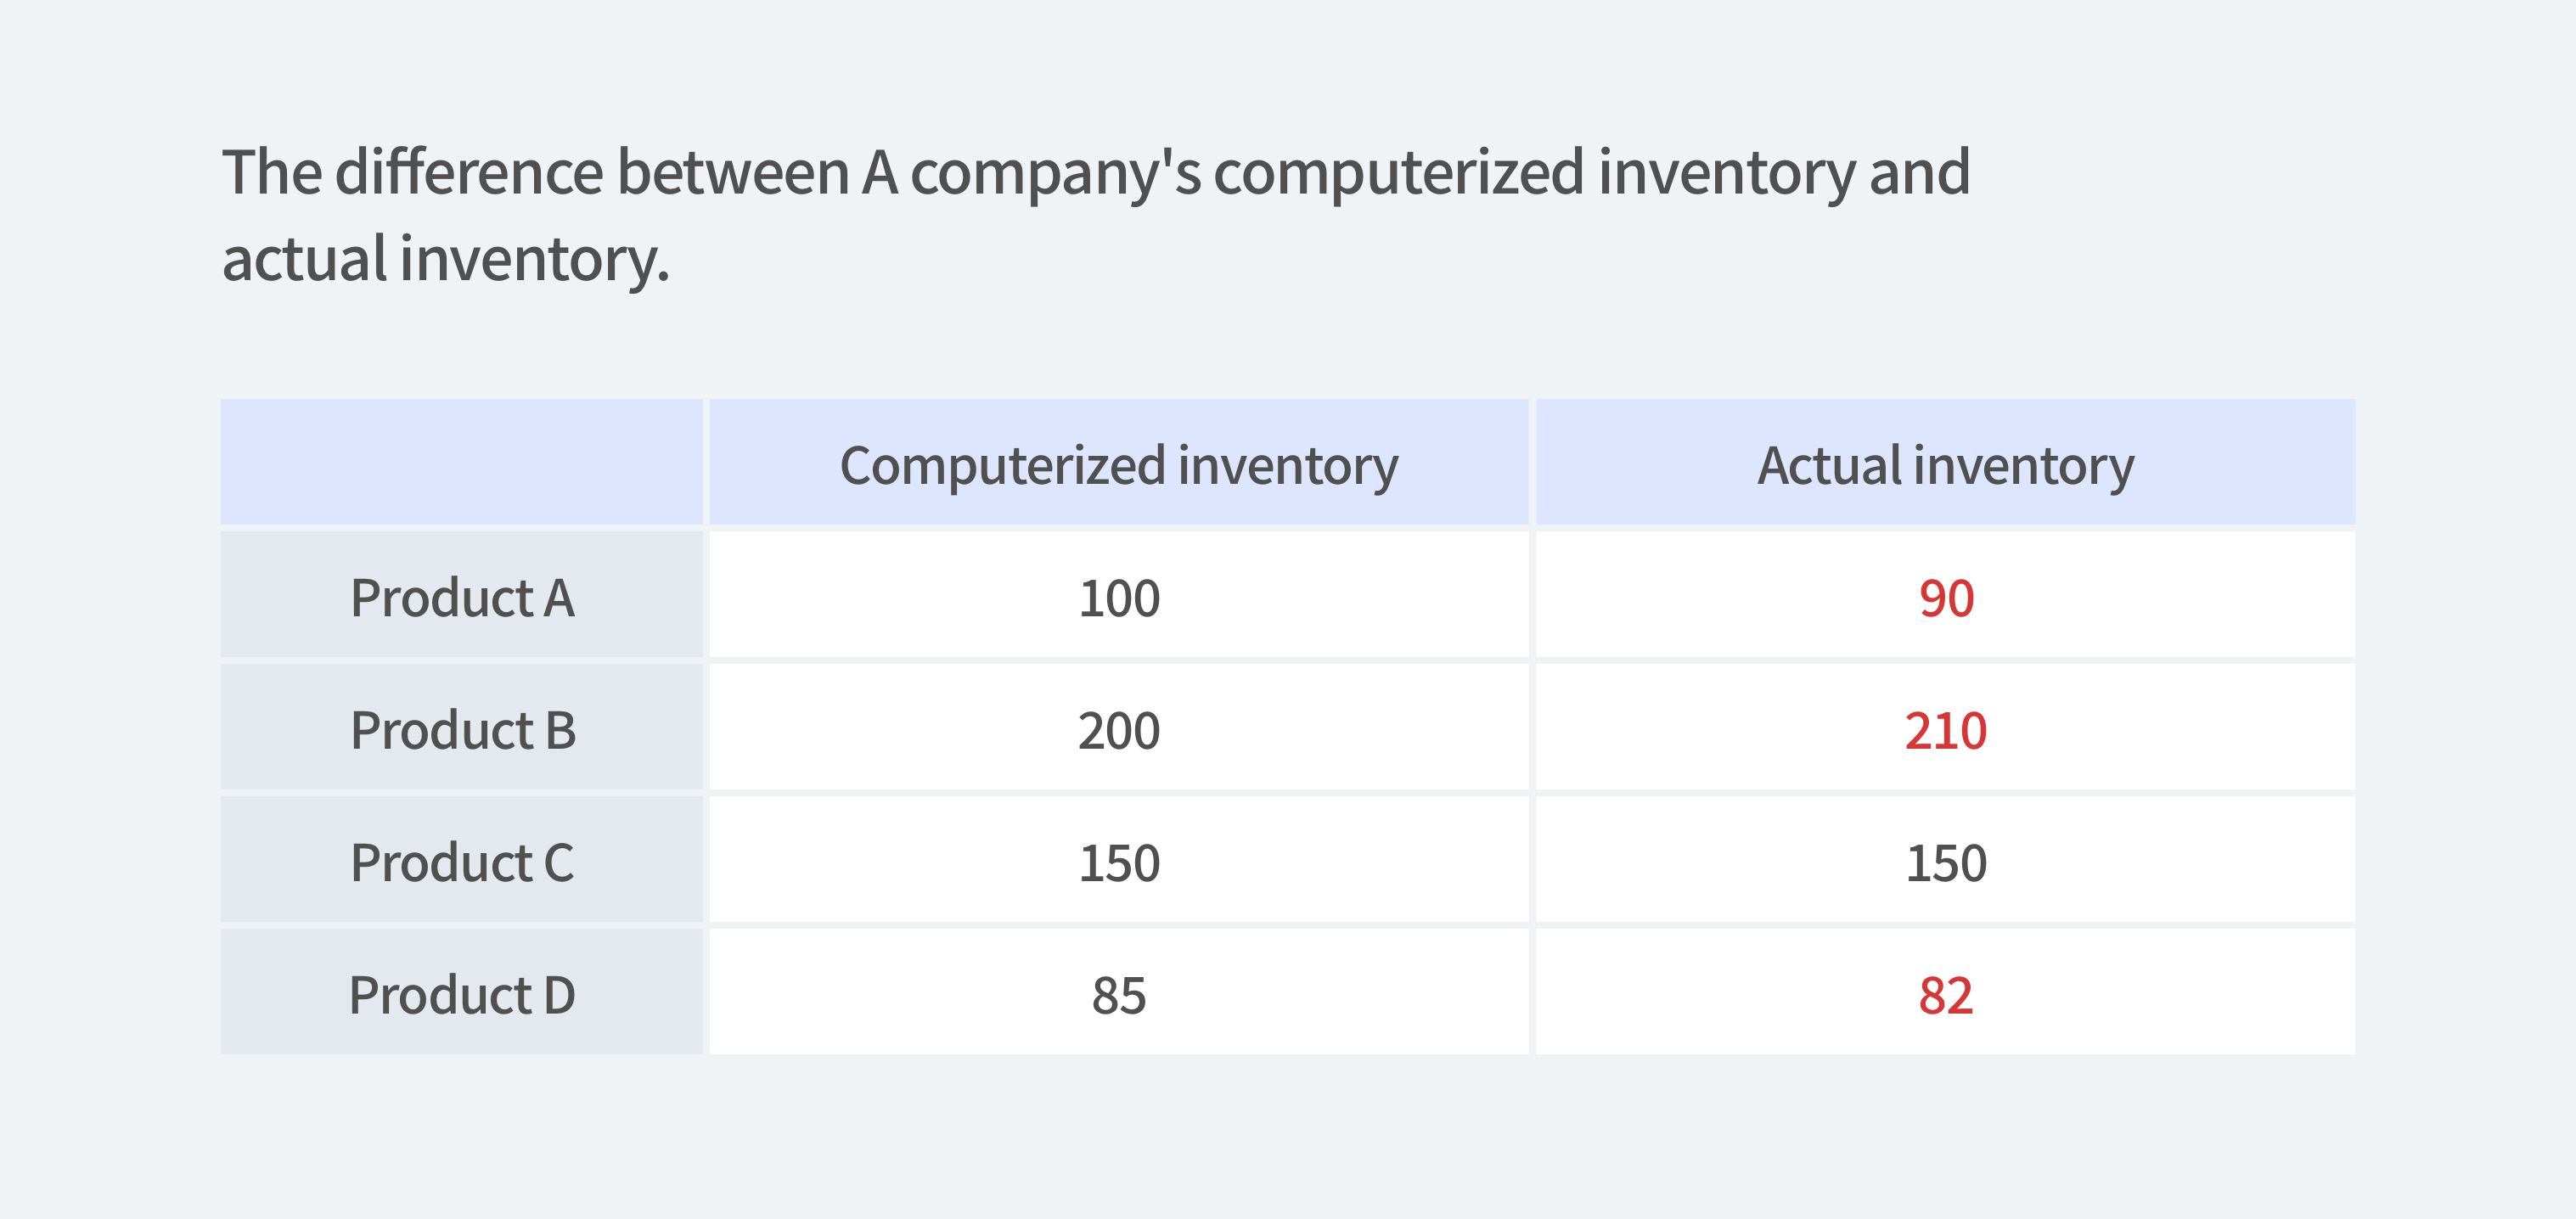 A discrepancy between the physical inventory and the inventory levels recorded on the system